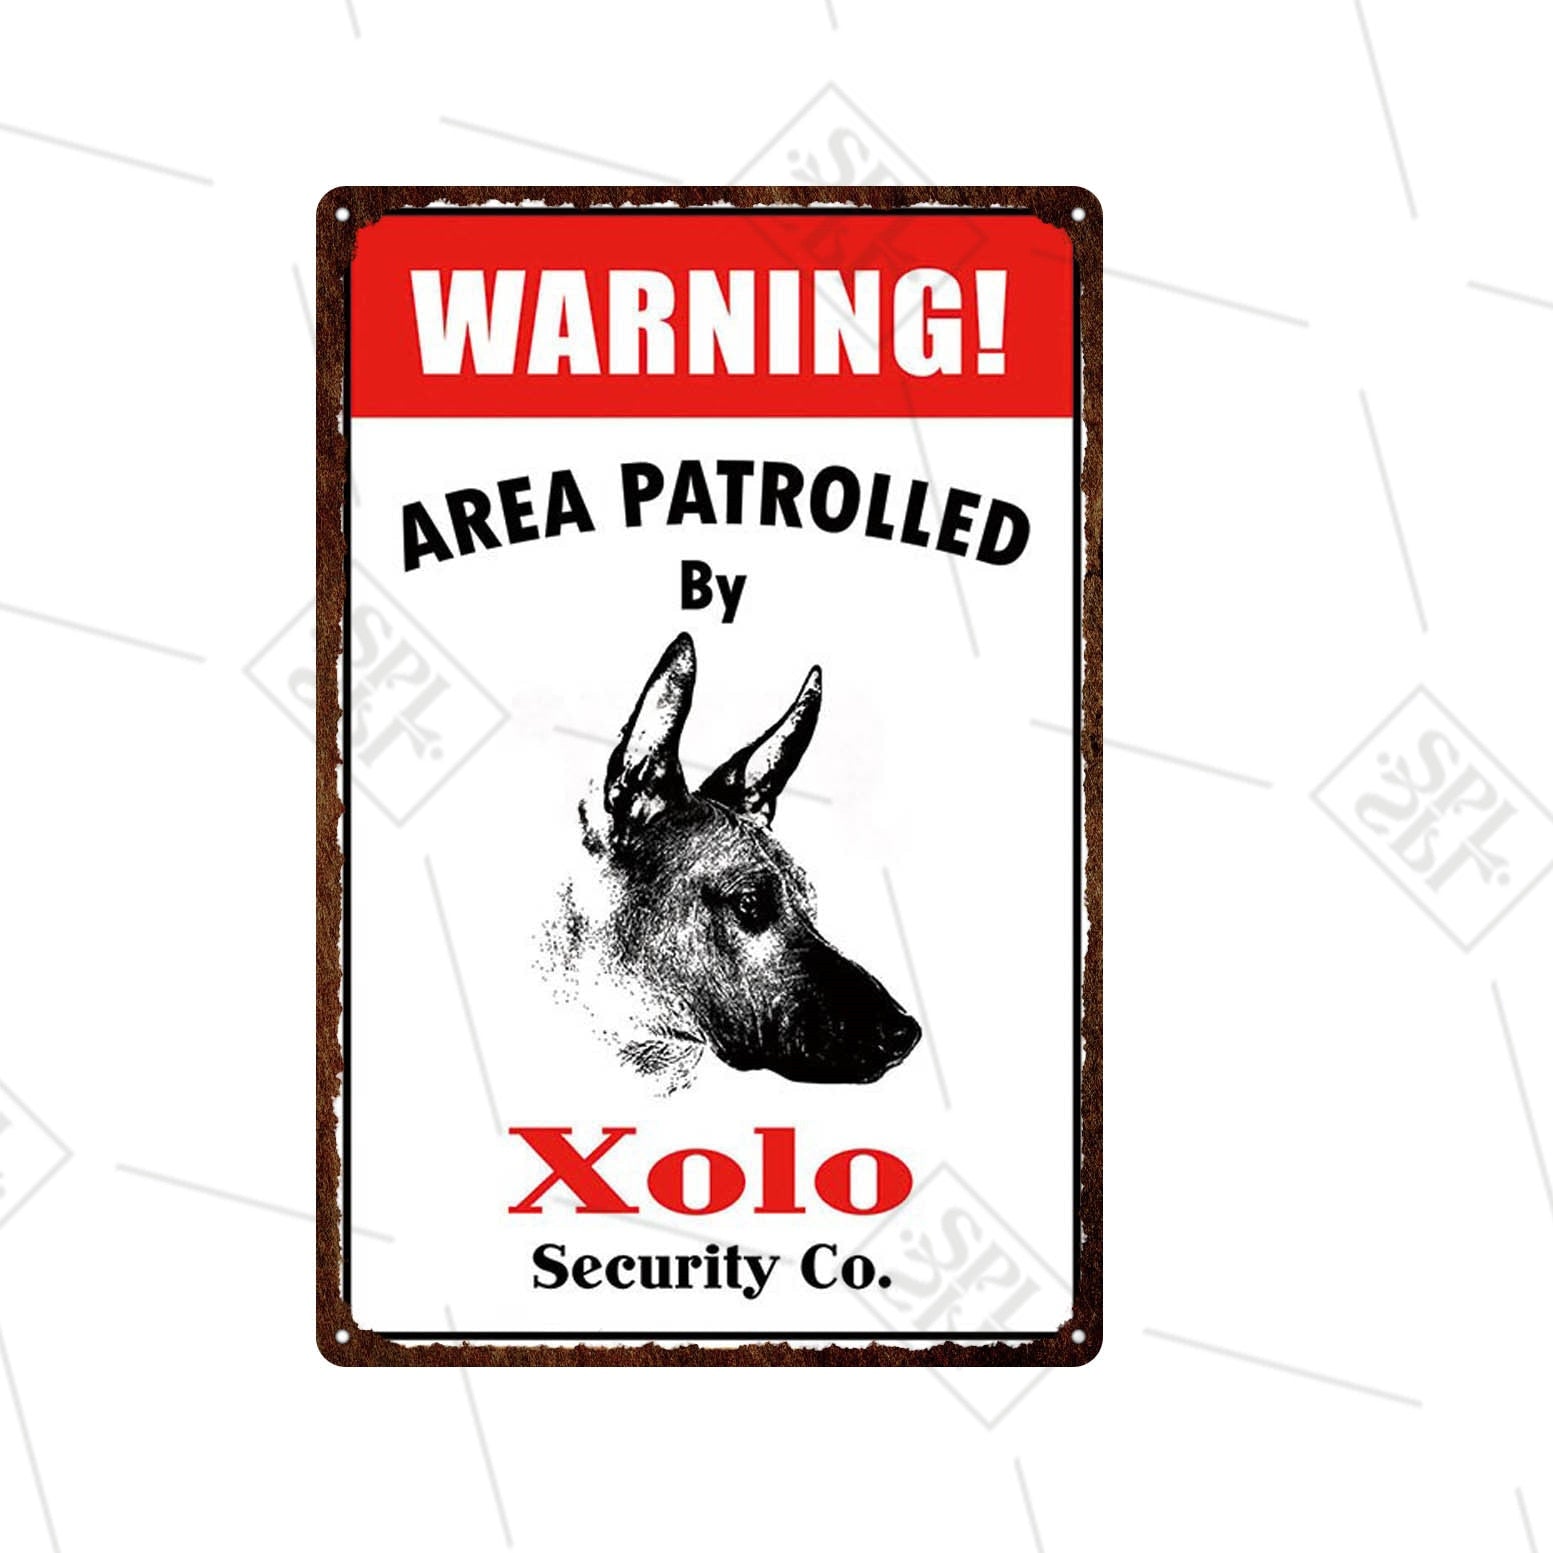 "Warning Area Patrolled by 'Dog' Security & Co" signs - Style's Bug Xolo